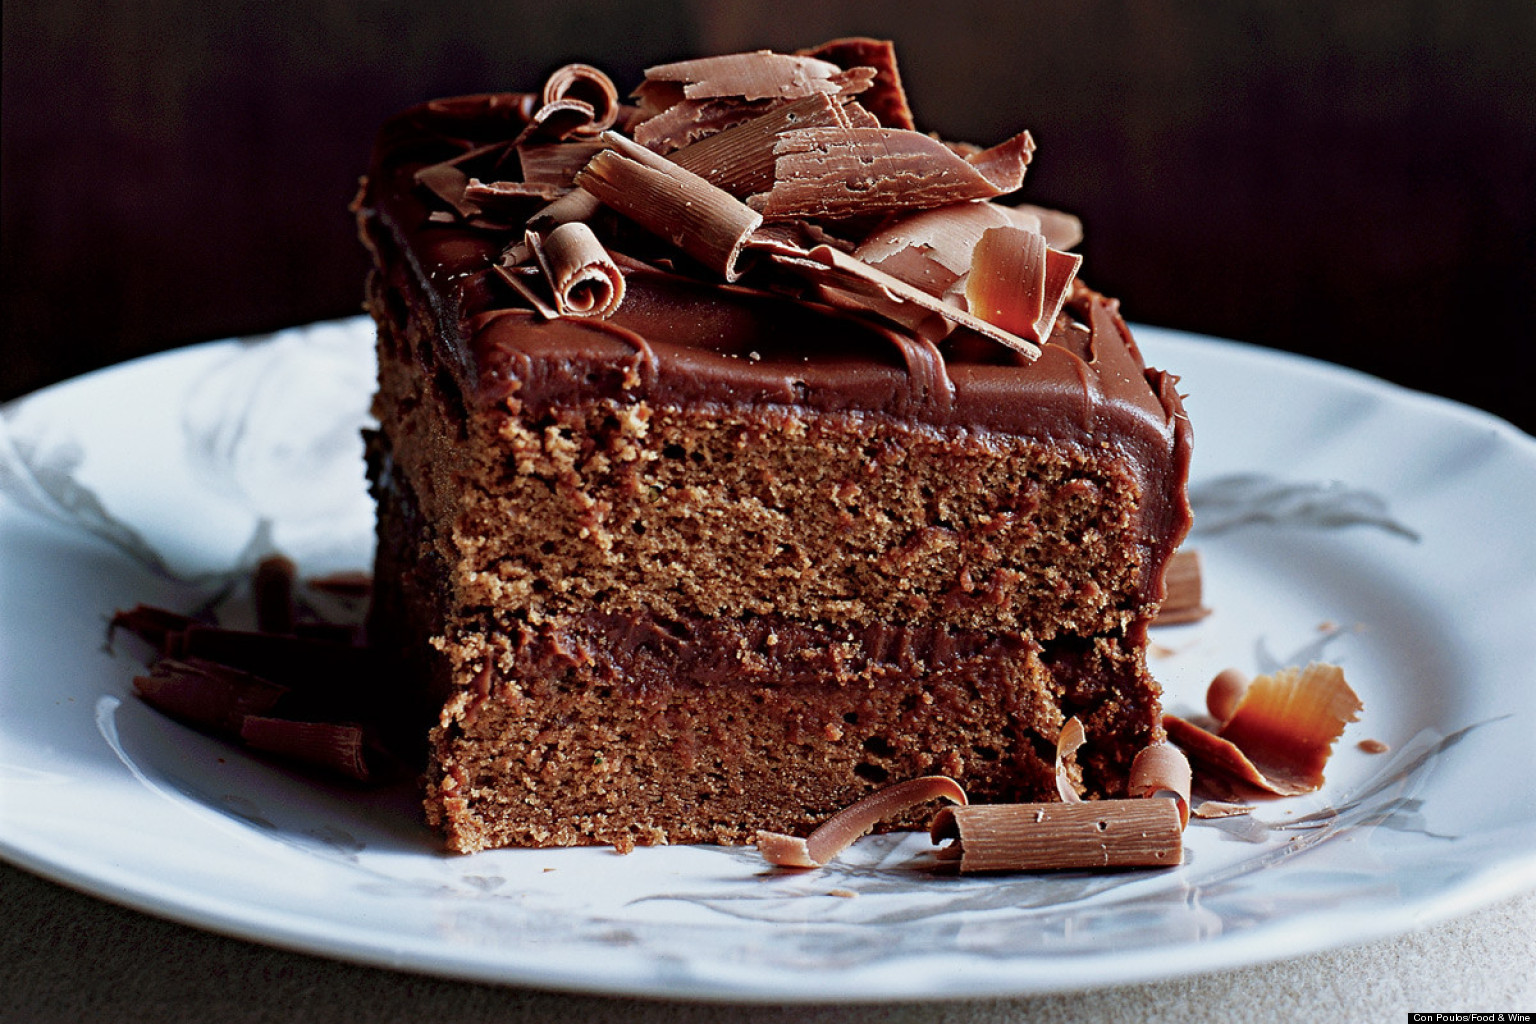 The Best Chocolate Cake Recipes You'll Ever Make (PHOTOS) | HuffPost